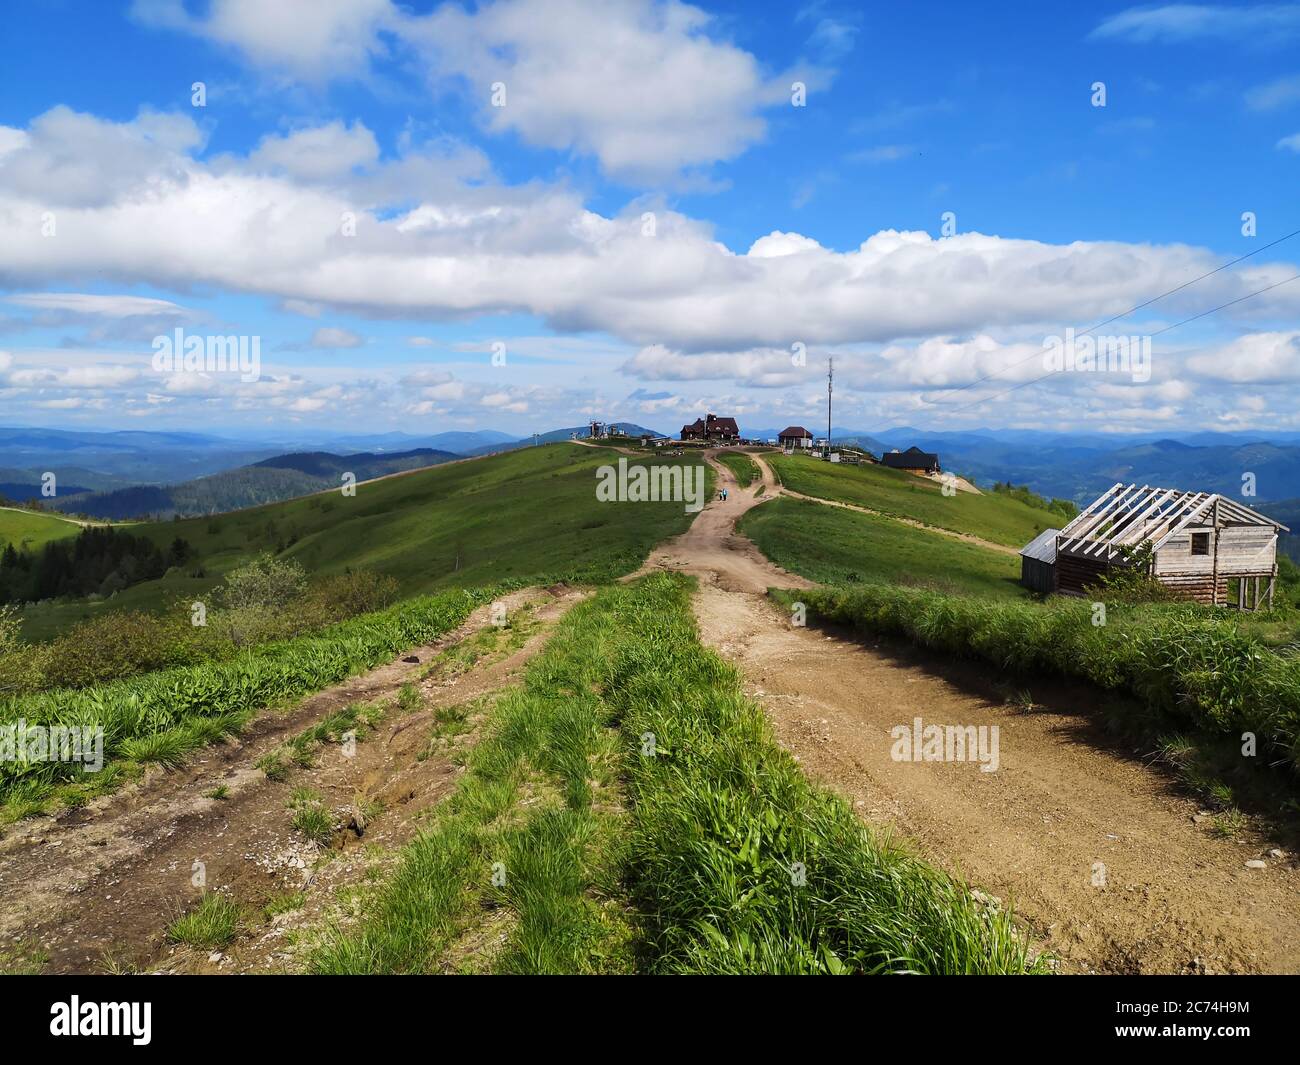 Earthy empty road along the top of Carpathian mountains high below white puffy clouds. Timber wooden houses on the horizon and on the roadside. Stock Photo